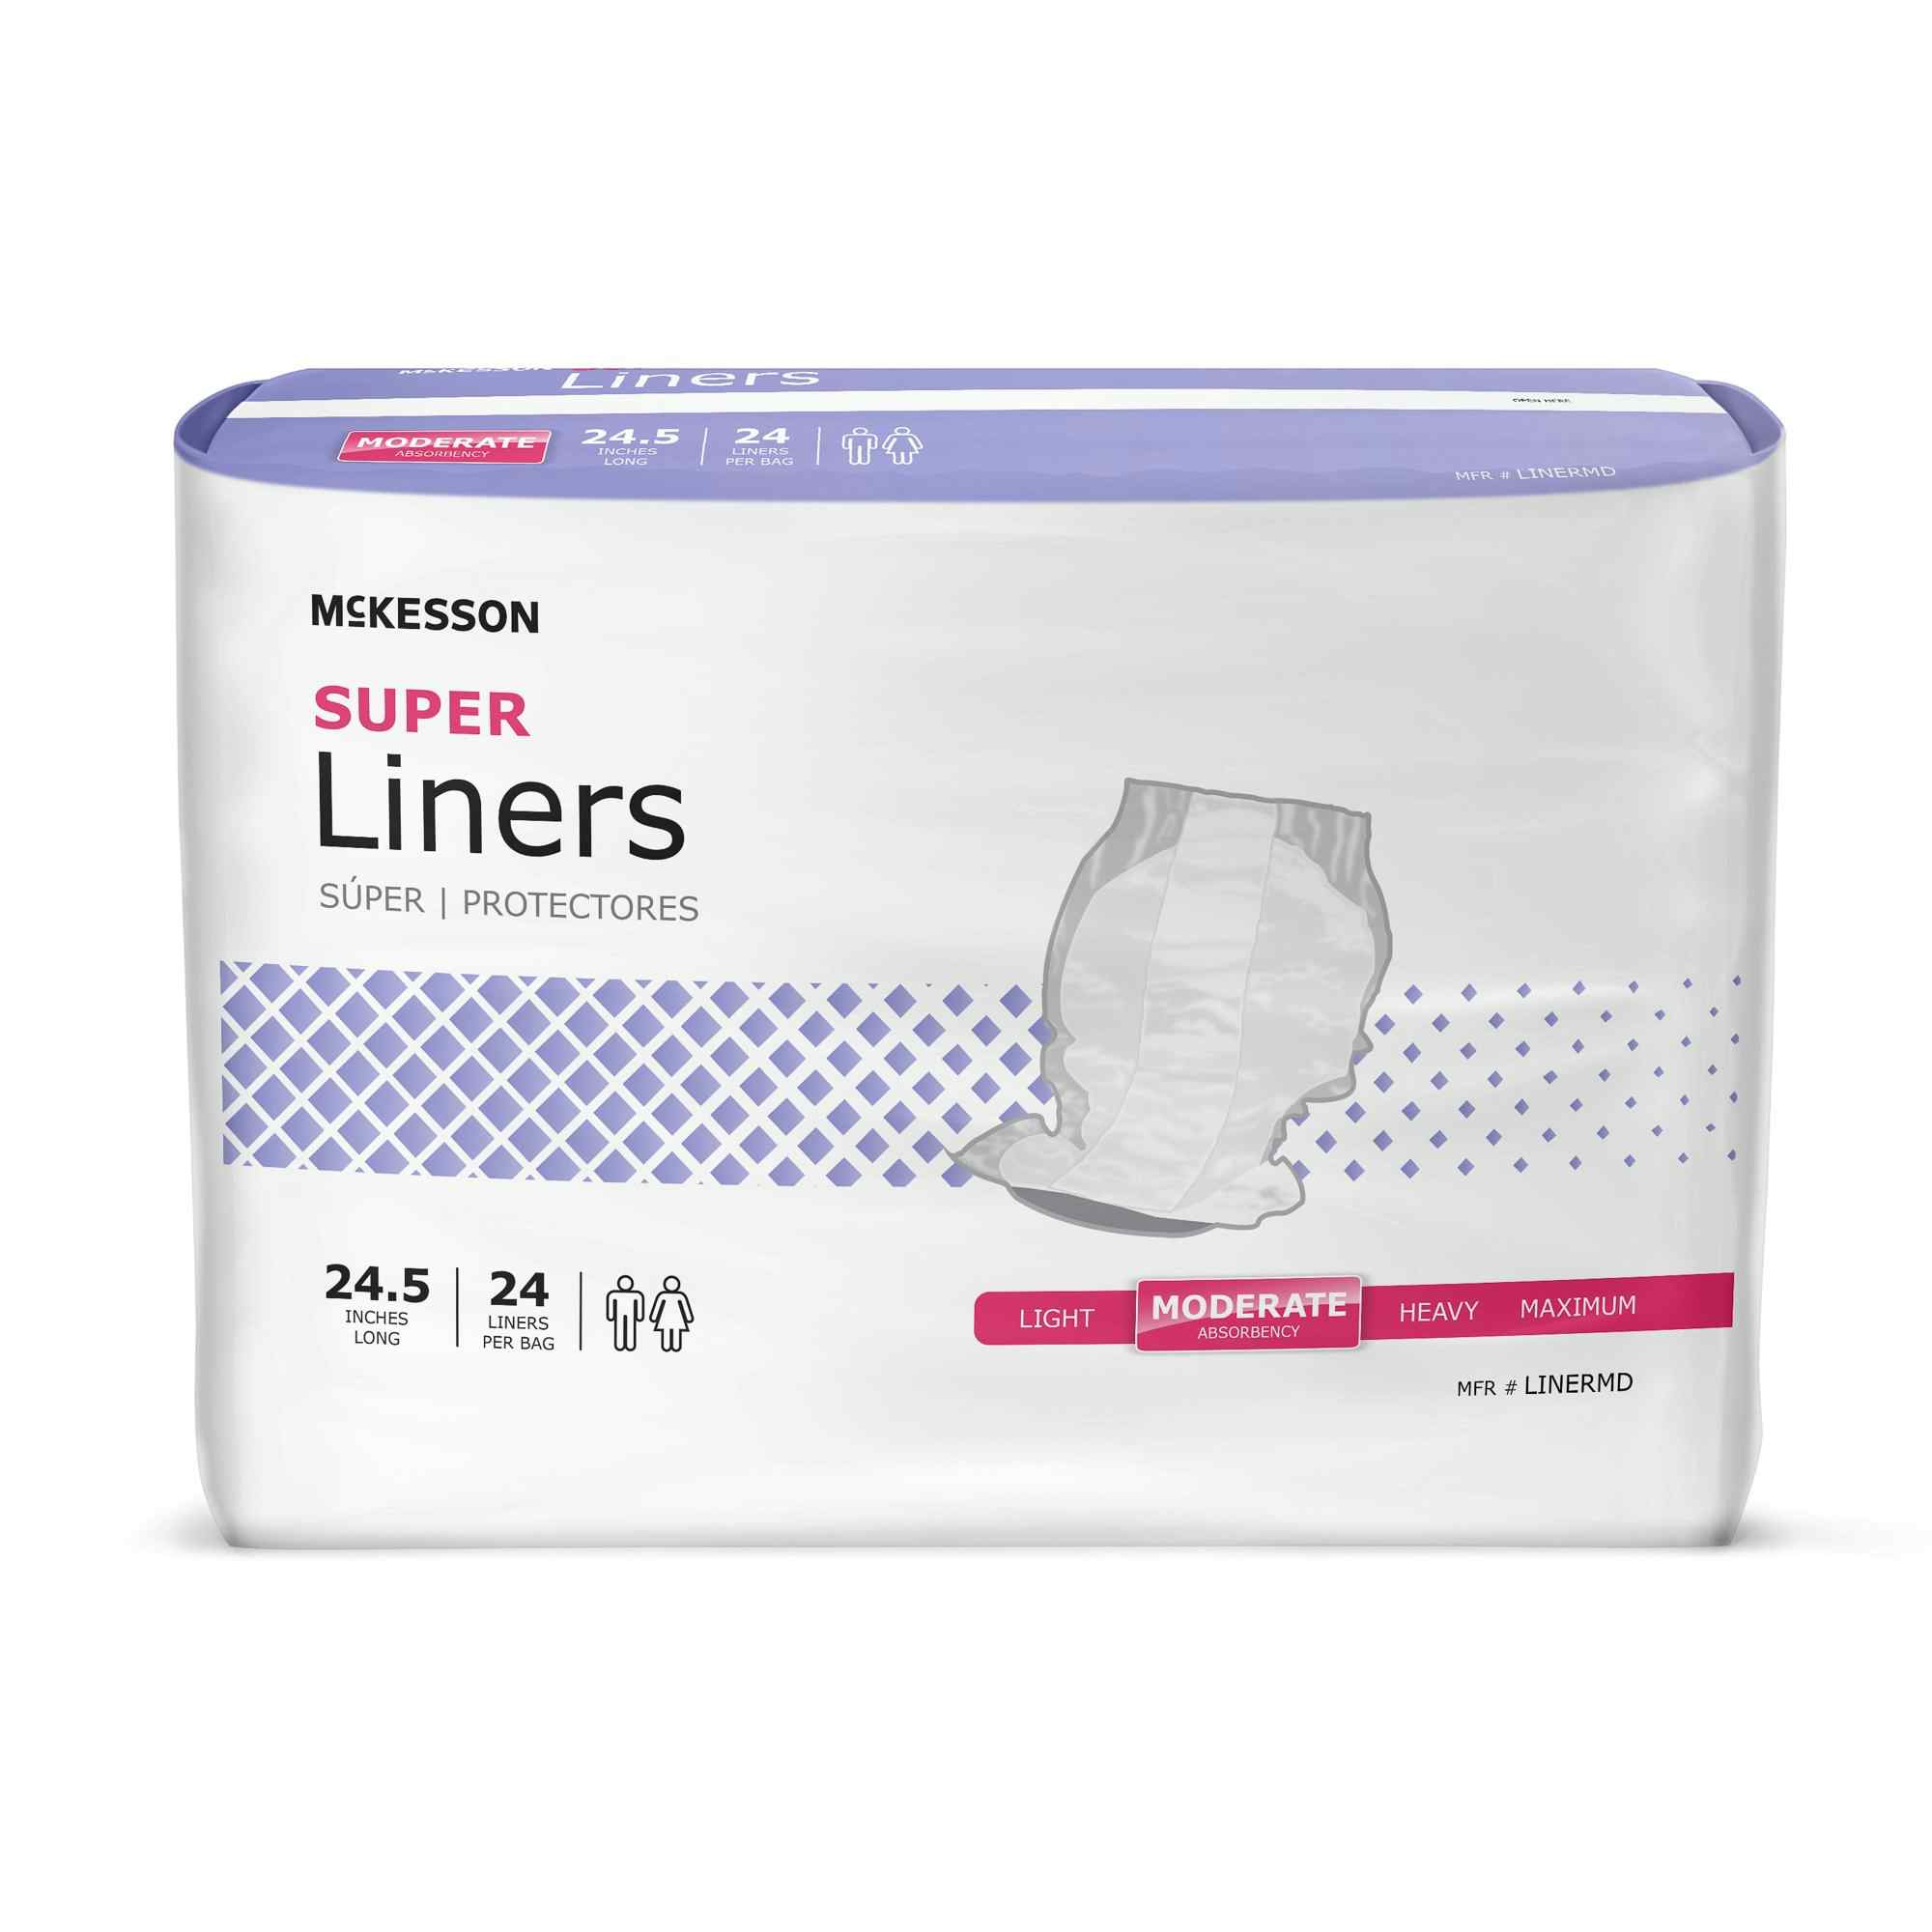 McKesson Classic Disposable Incontinence Liner, Moderate Absorbency, LINERMD, One Size Fits Most - Bag of 24